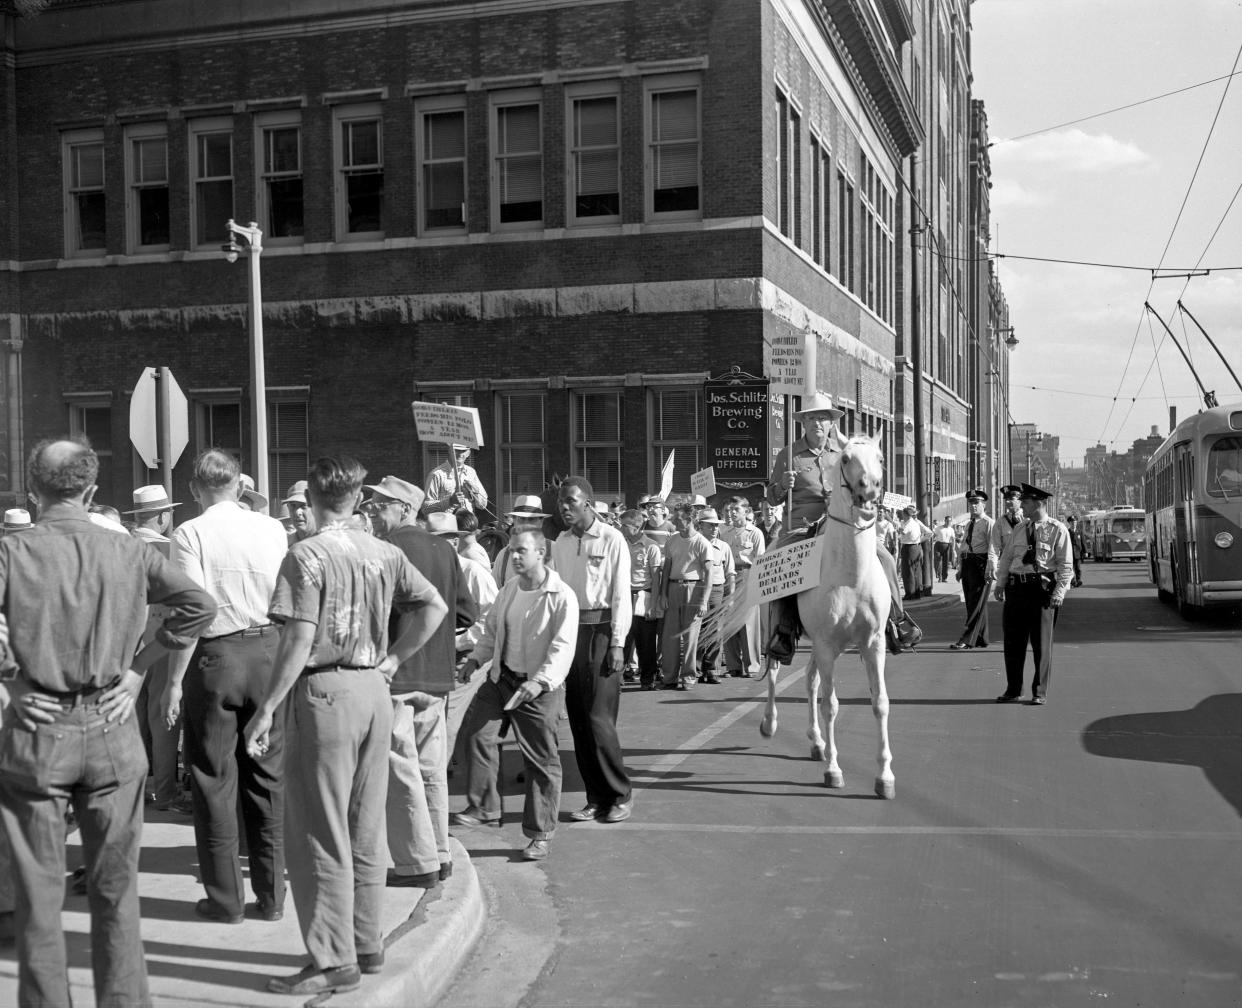 About 1,000 picketers, including some on horseback, march outside the Schlitz Brewery on West Galena Street on July 24, 1953. This photo ran on the front page of that day's Milwaukee Journal.